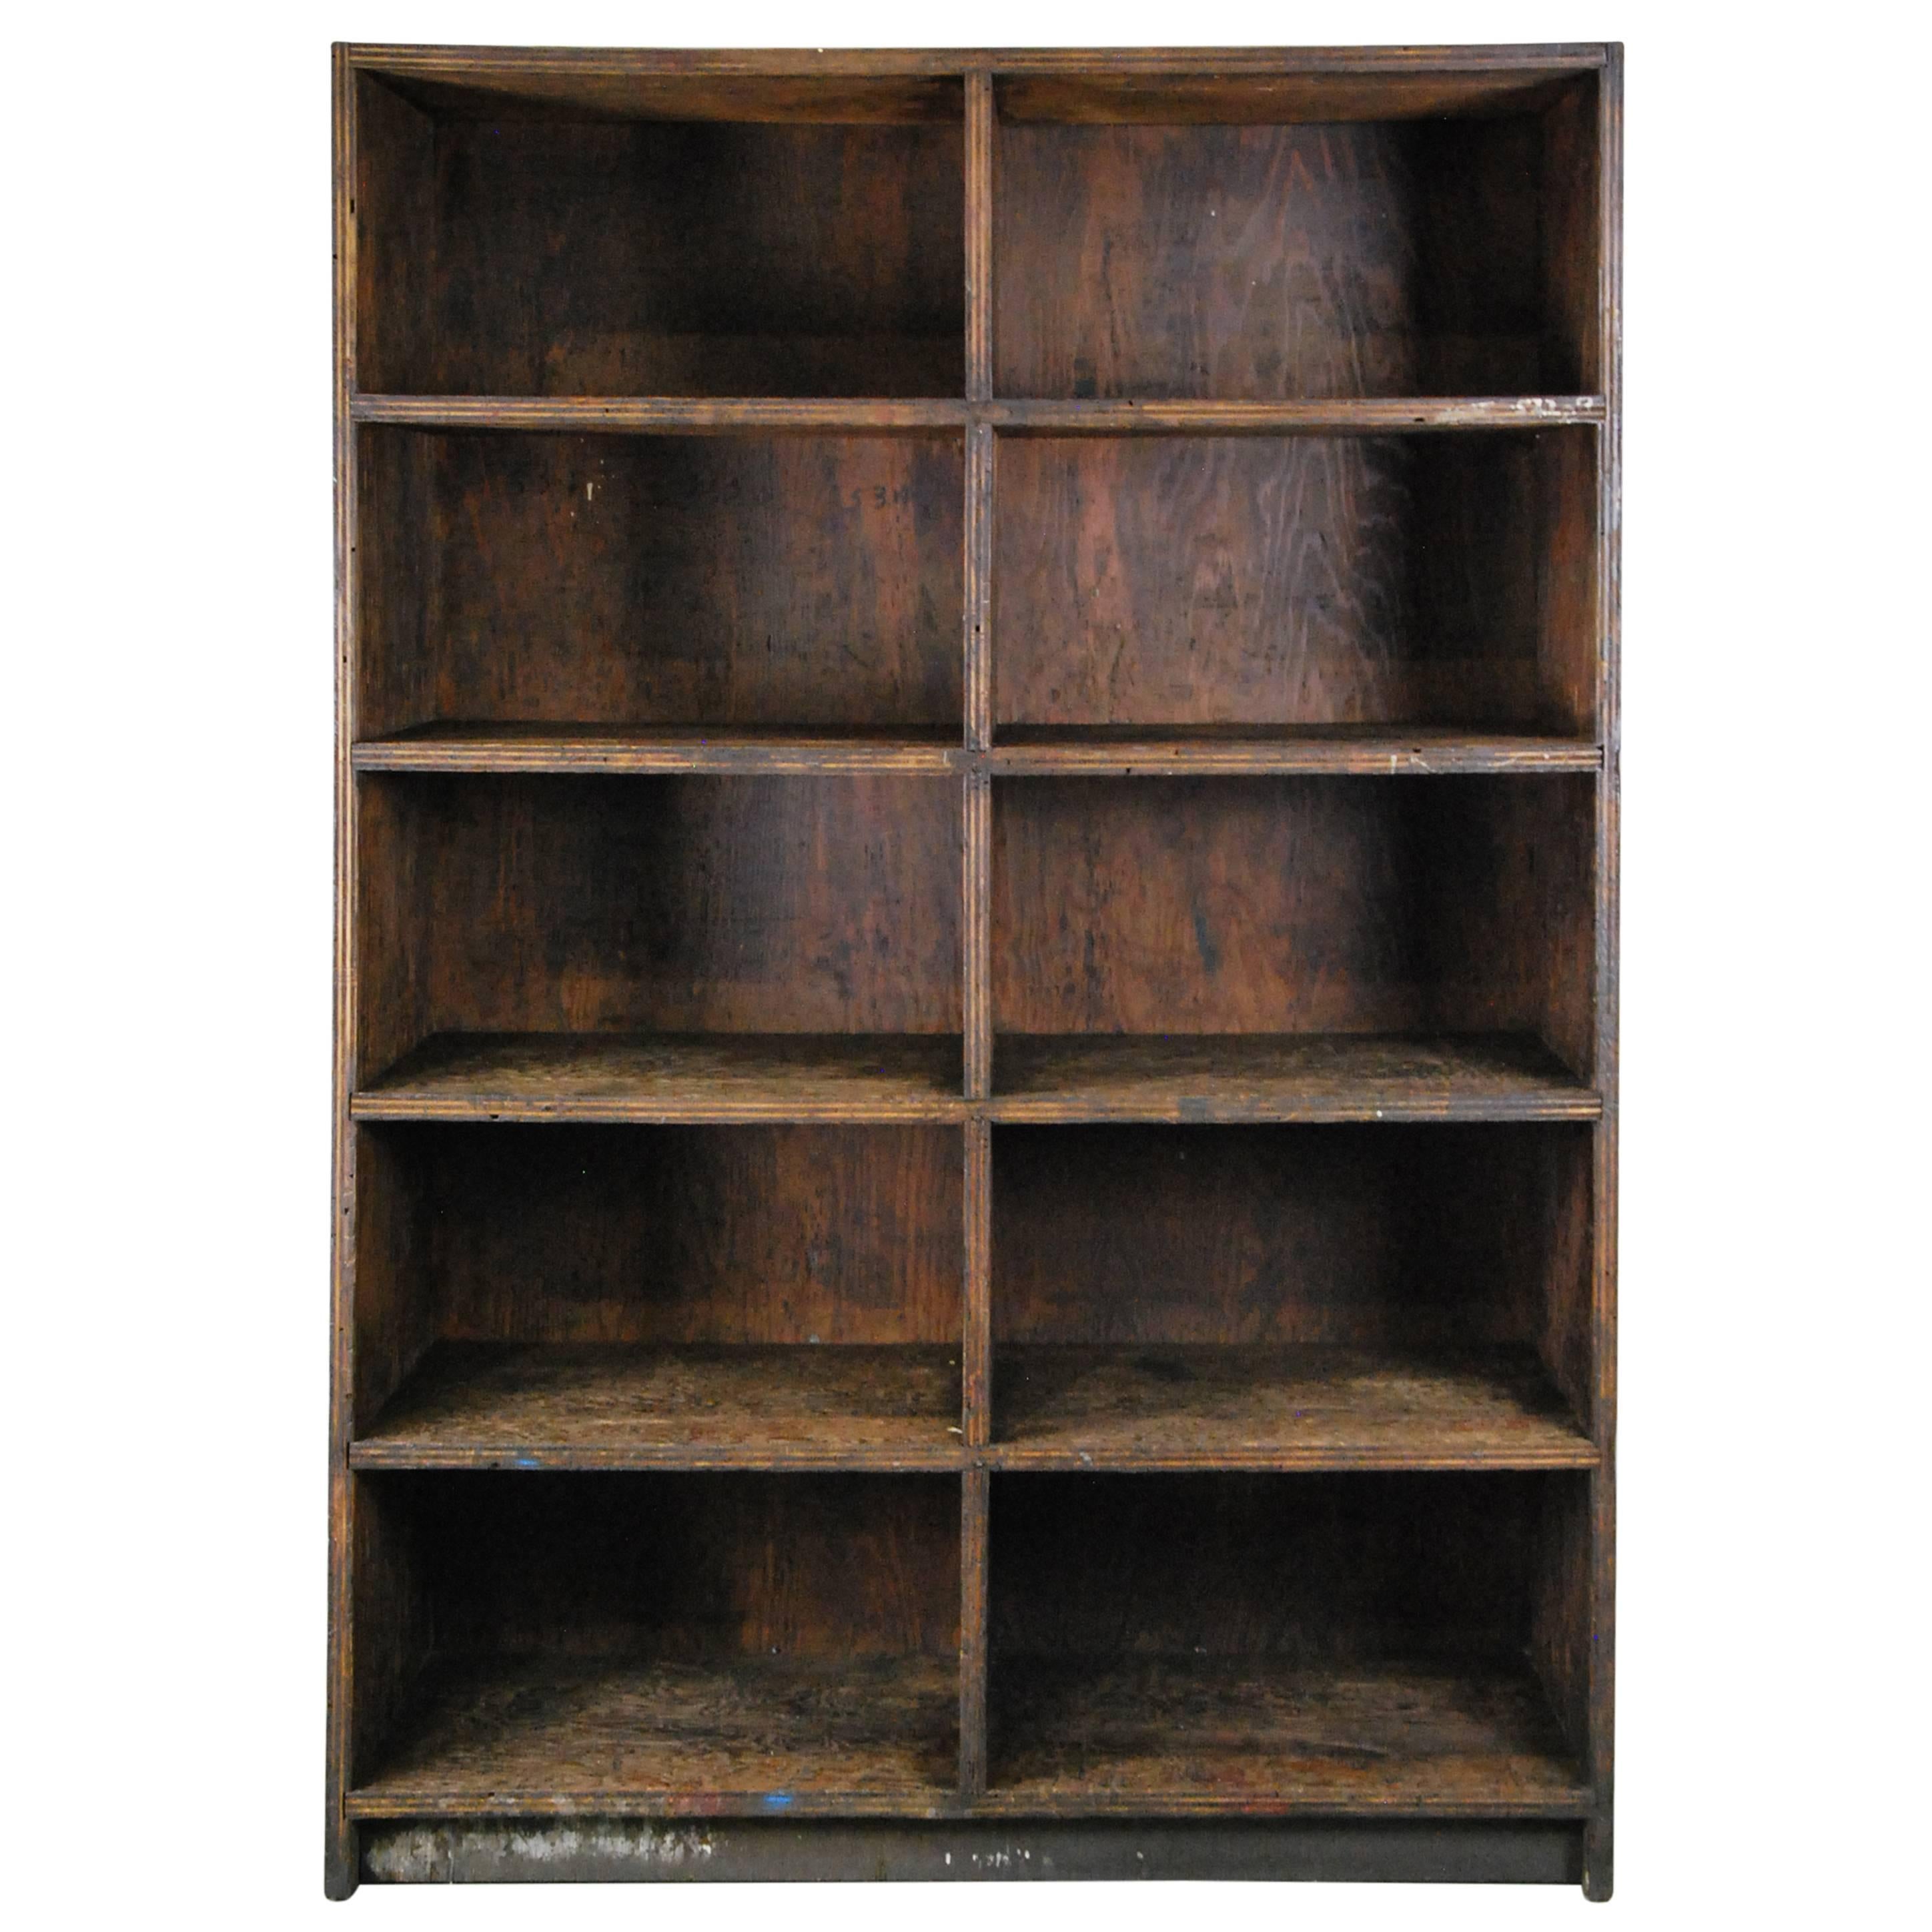 1930 Mercantile Wooden Industrial Storage Cabinets